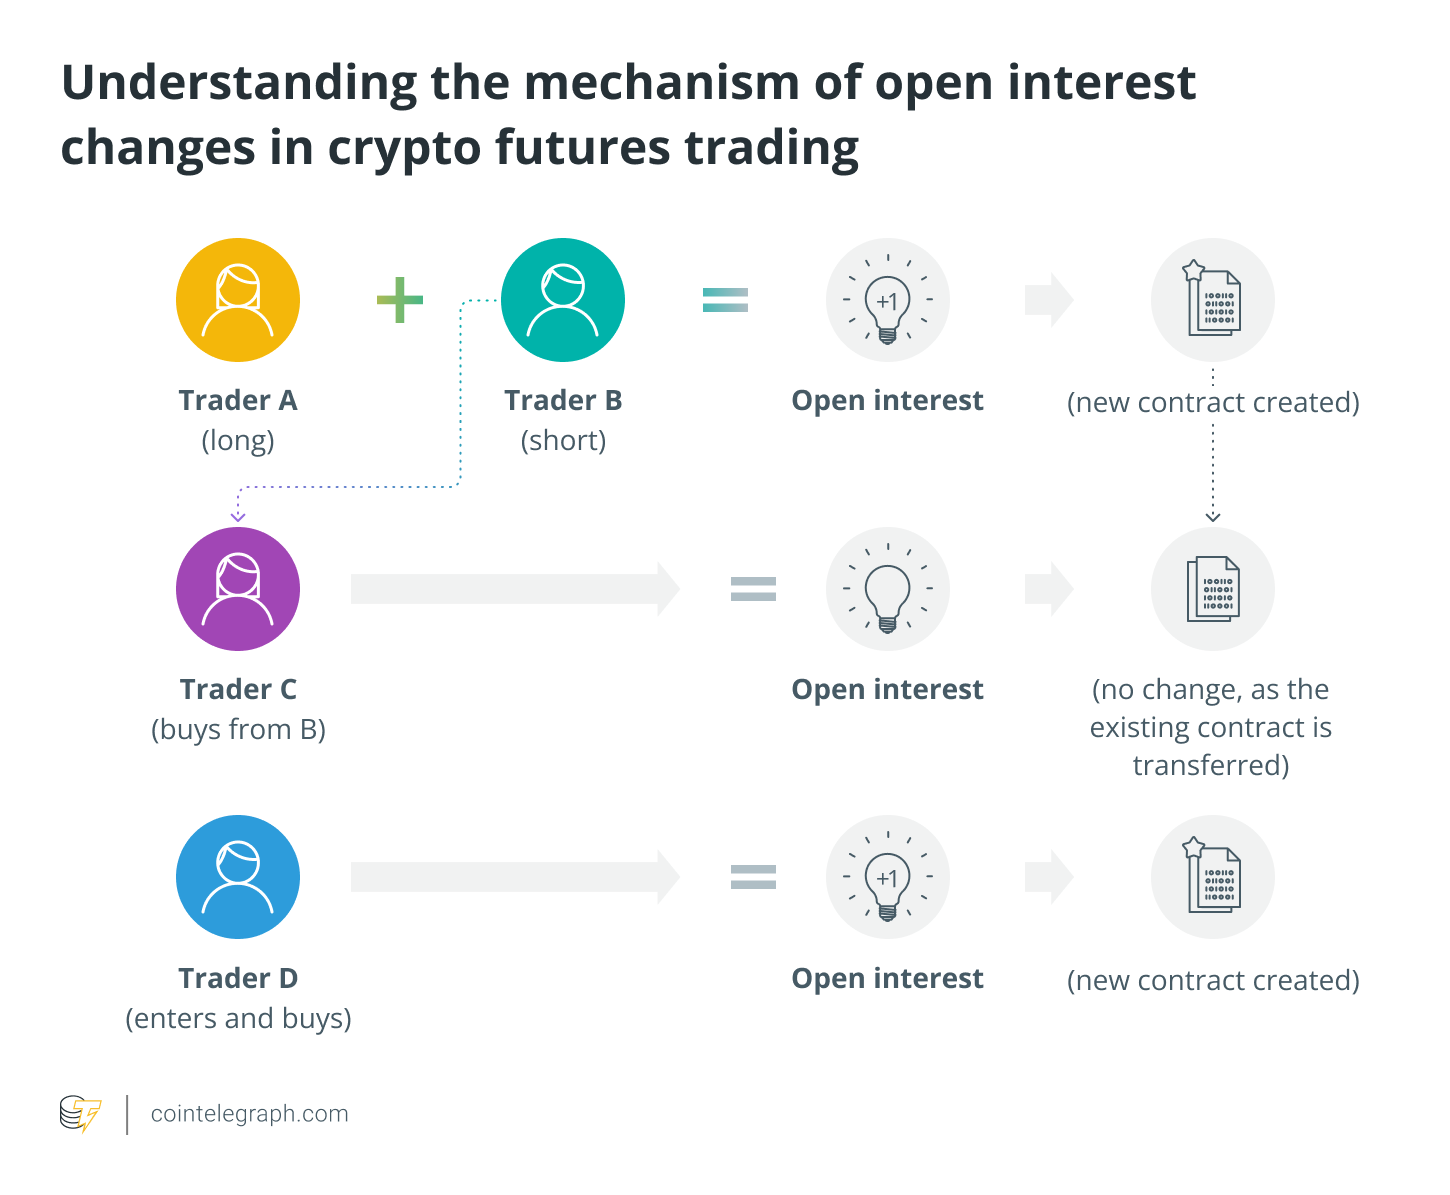 Understanding the mechanism of open interest changes in crypto futures trading